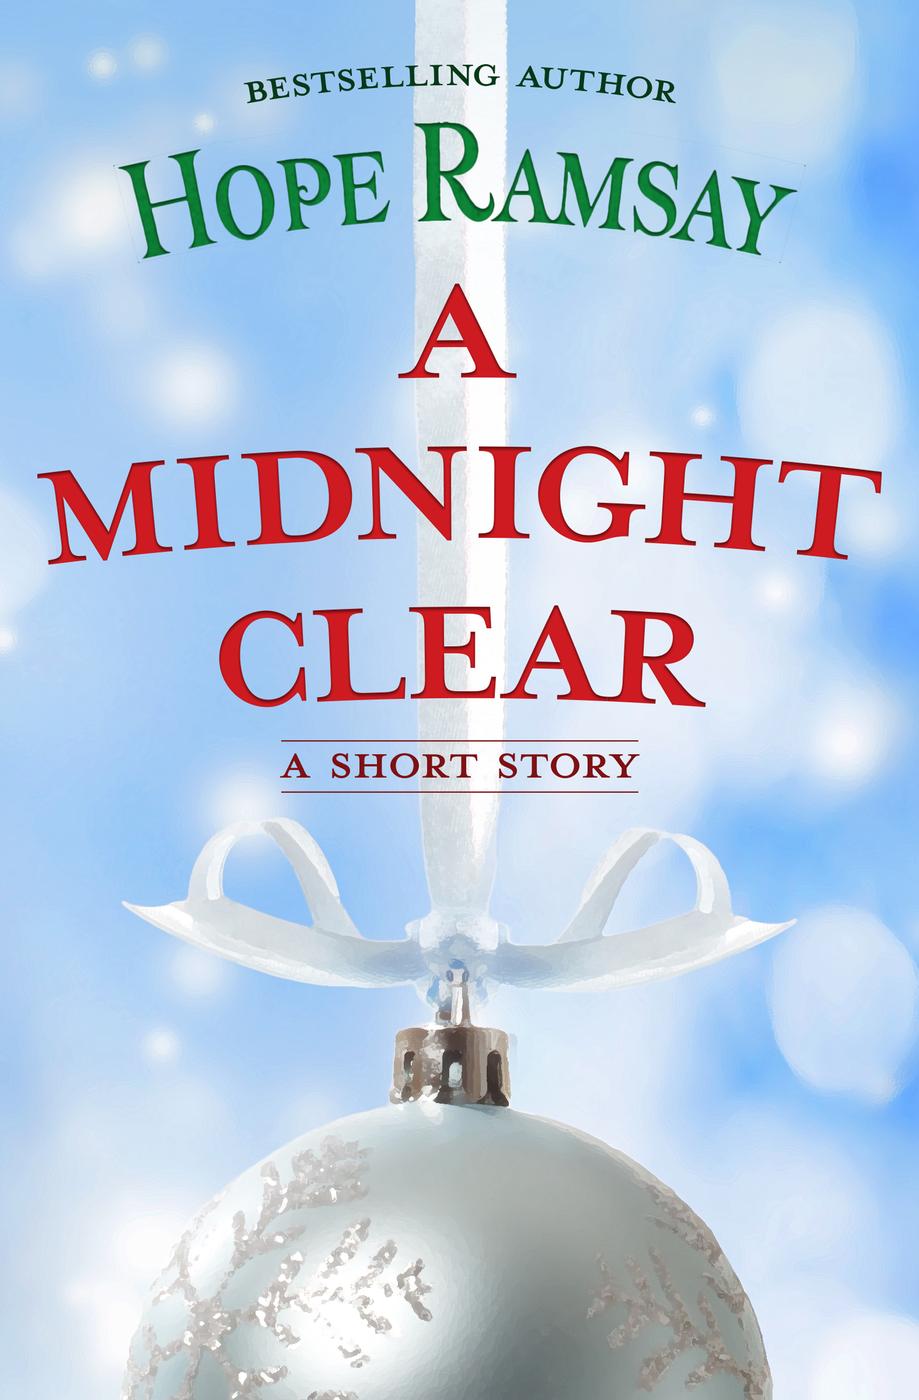 A Midnight Clear (2015) by Hope Ramsay